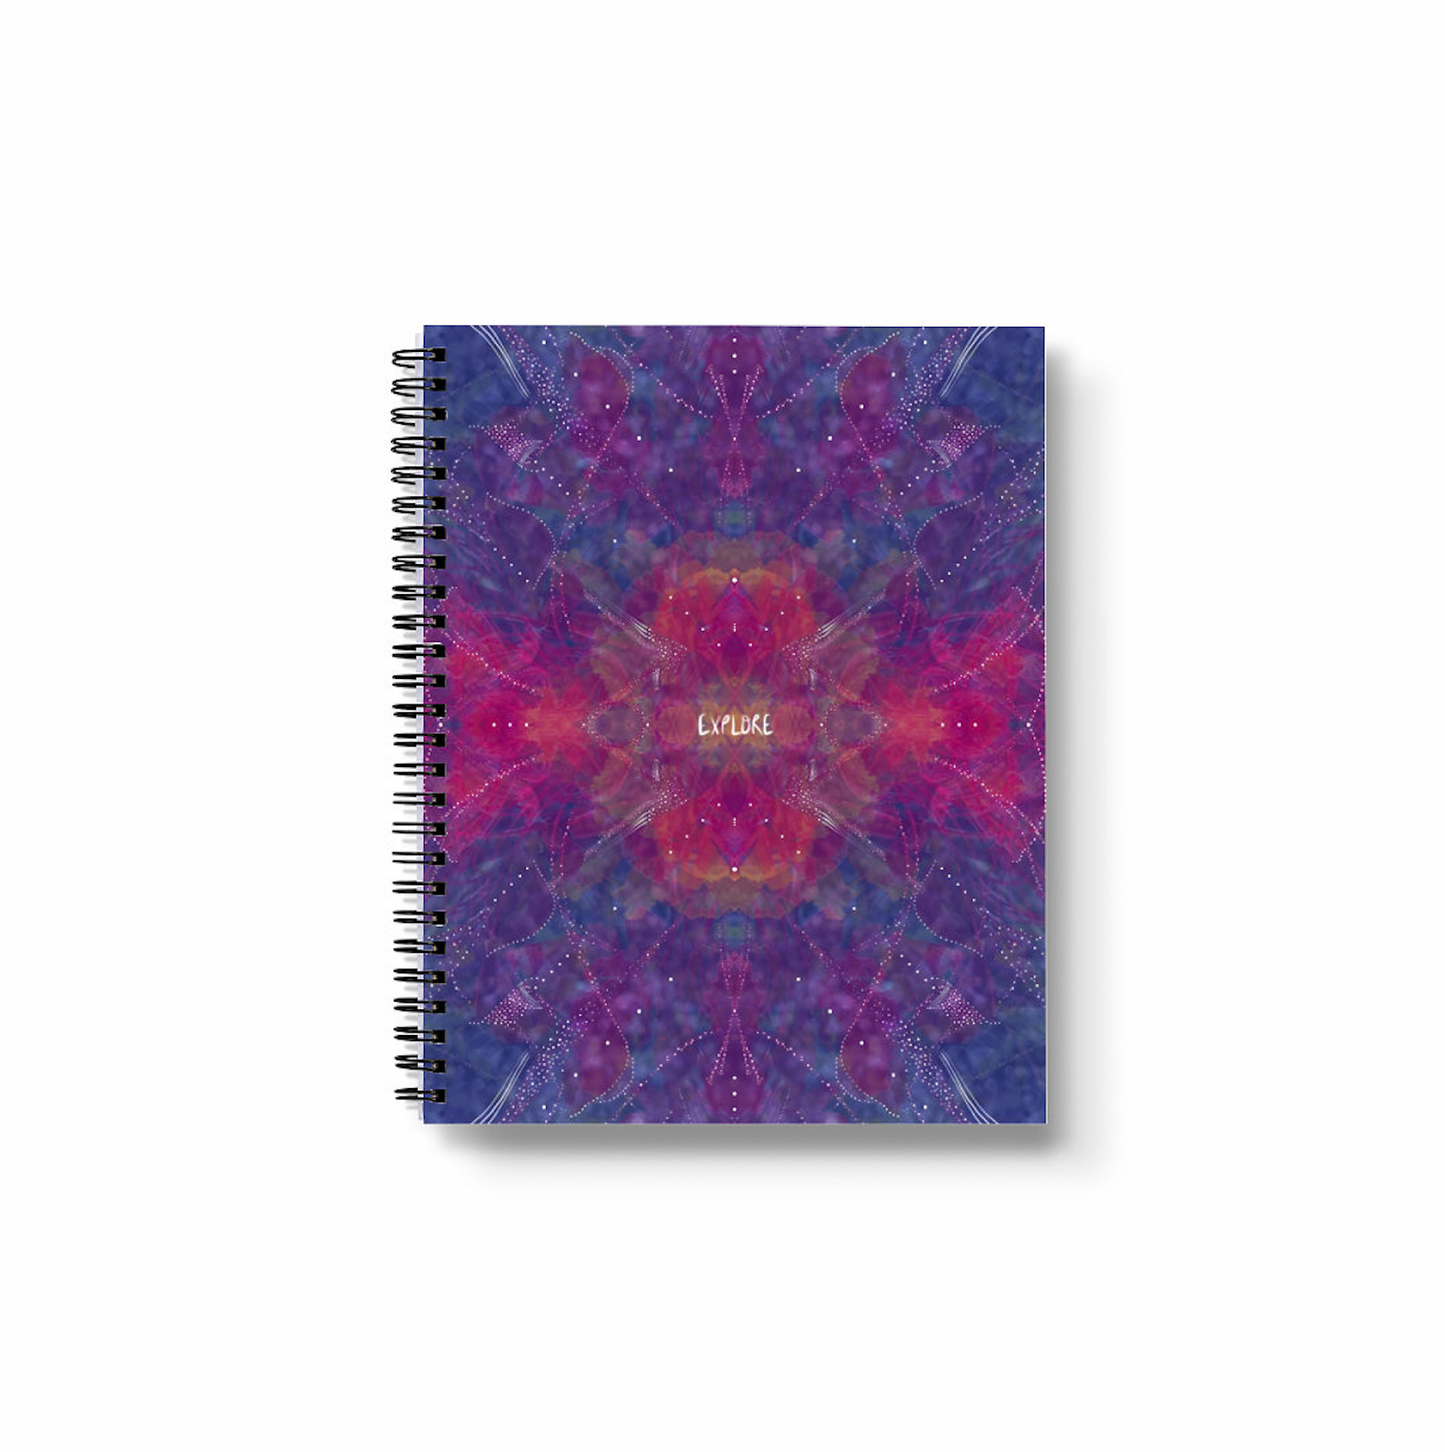 🌸 you are PRESENCE [PAPER NOTEBOOKS] 🚀 explore your inner wild